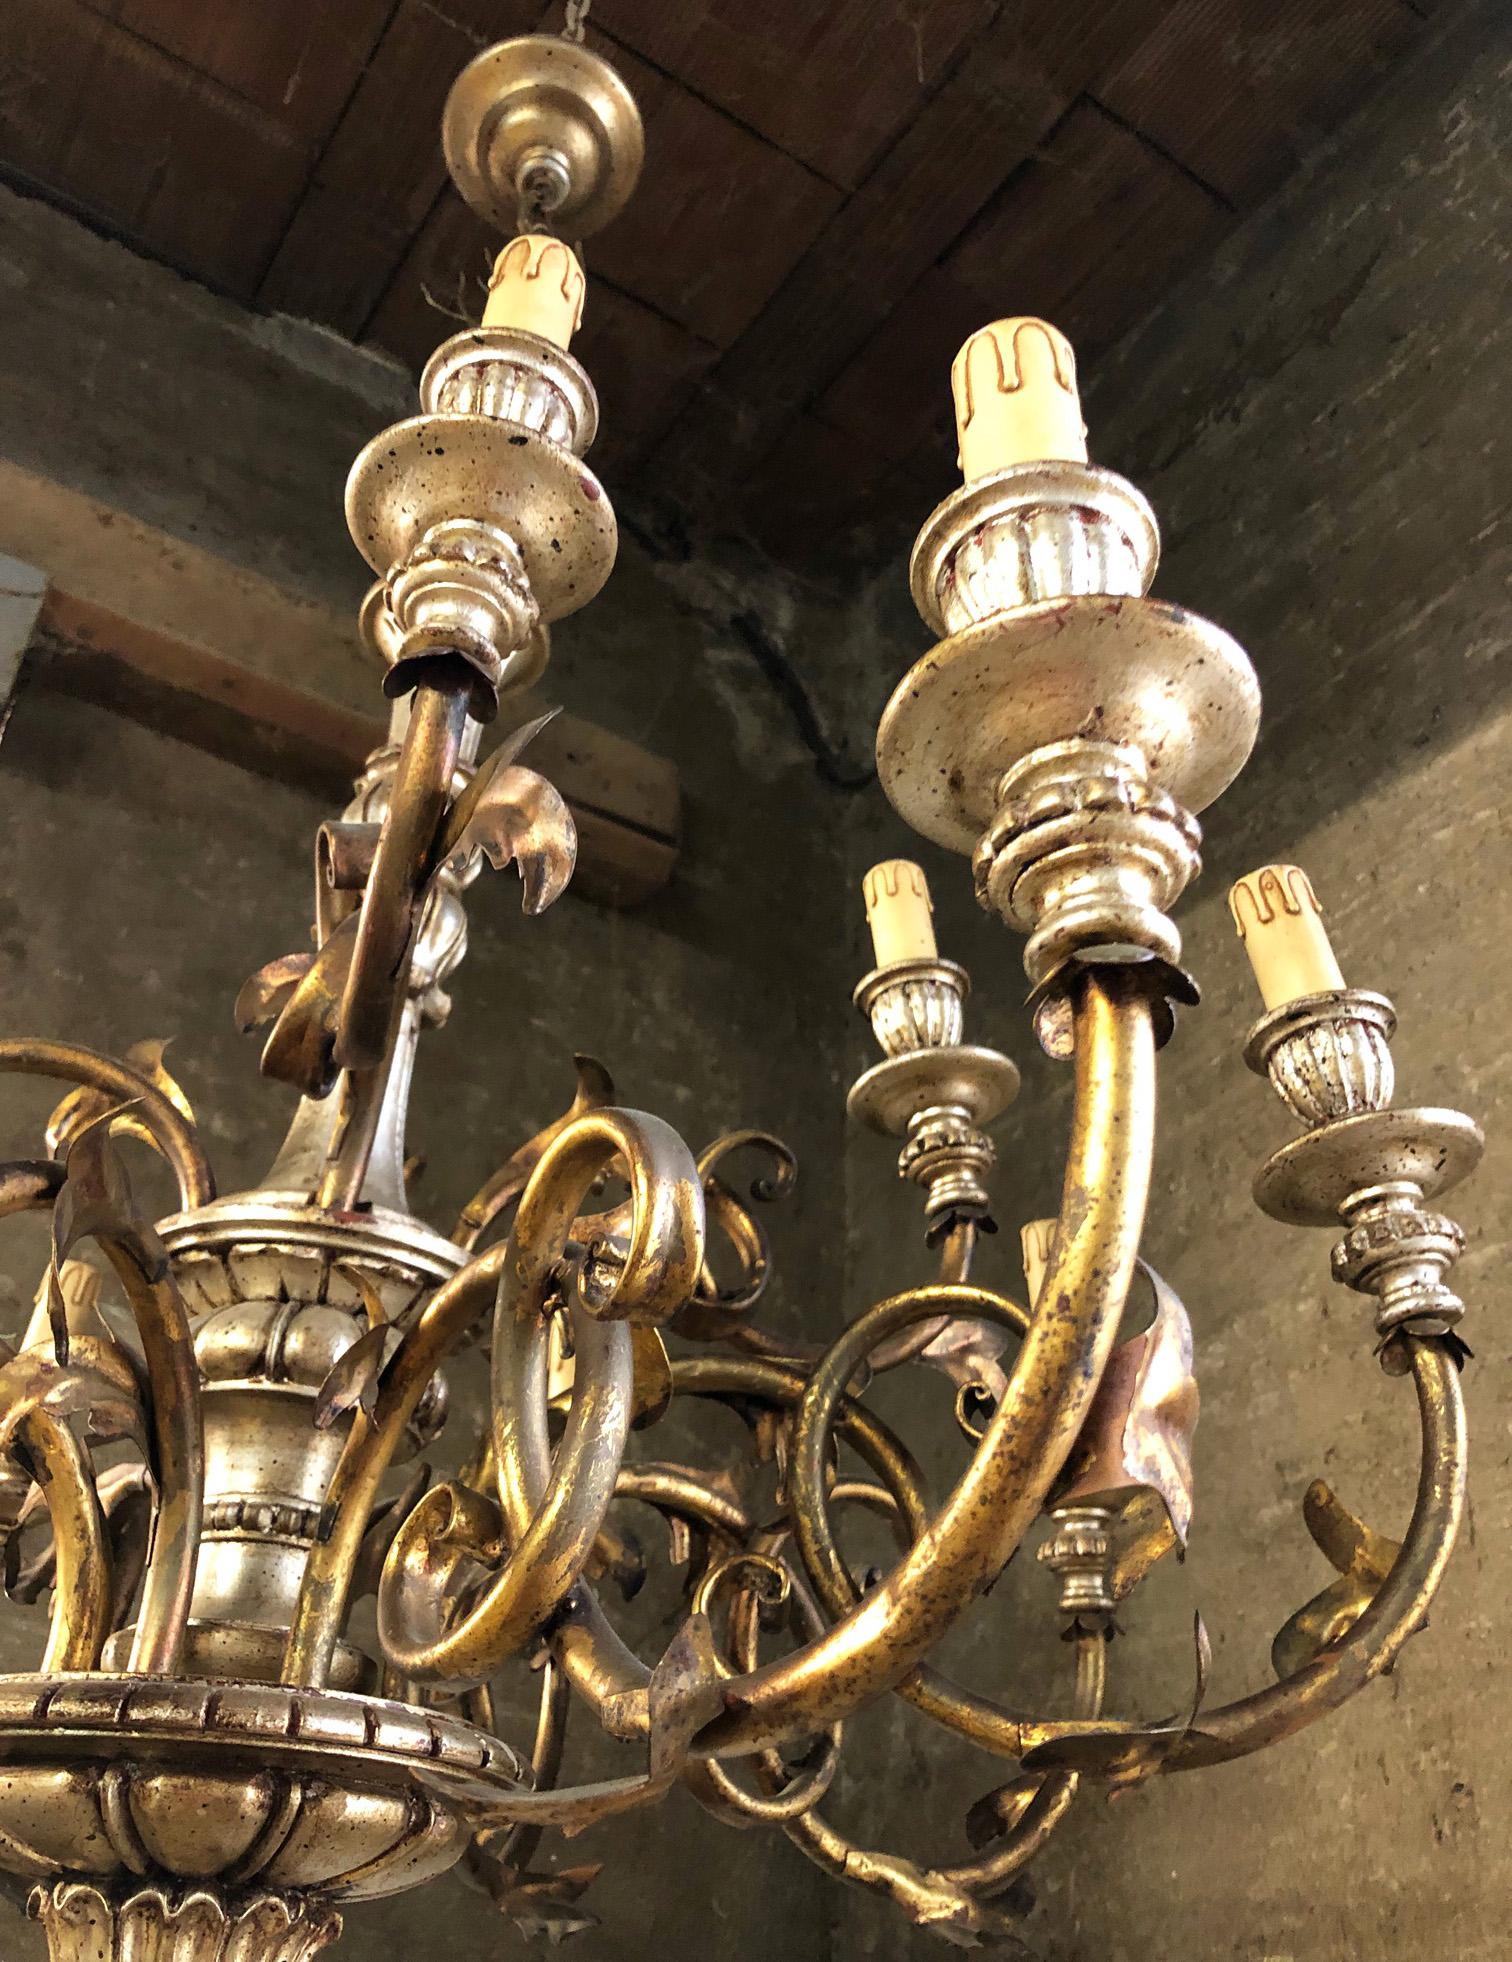 Italian chandelier with 12 lights in wood and metal, very elegant.
Original from 1930. 
Very special patinated color.
Comes from an old city villa in the Florence area of Tuscany.
As shown in the photographs and videos, there are some small